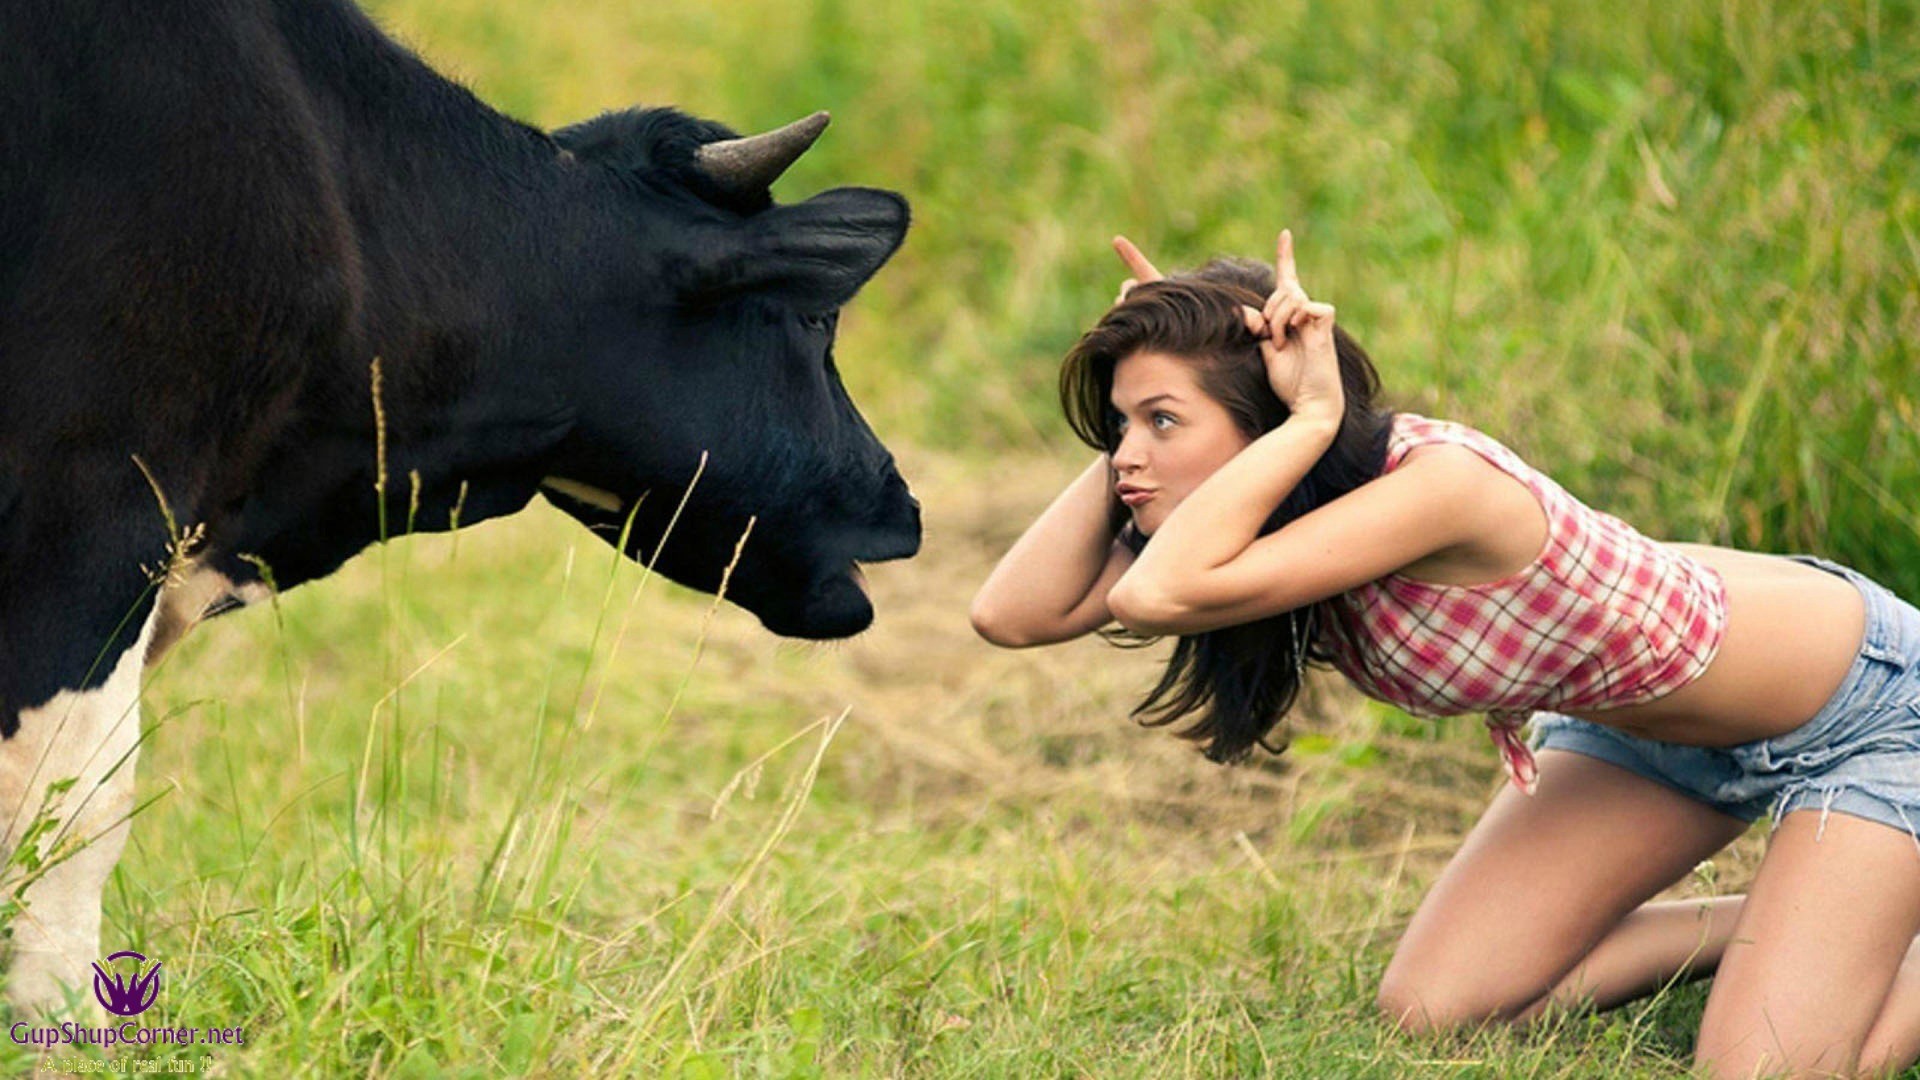 1920x1080 Girl and cow funny wallpaper